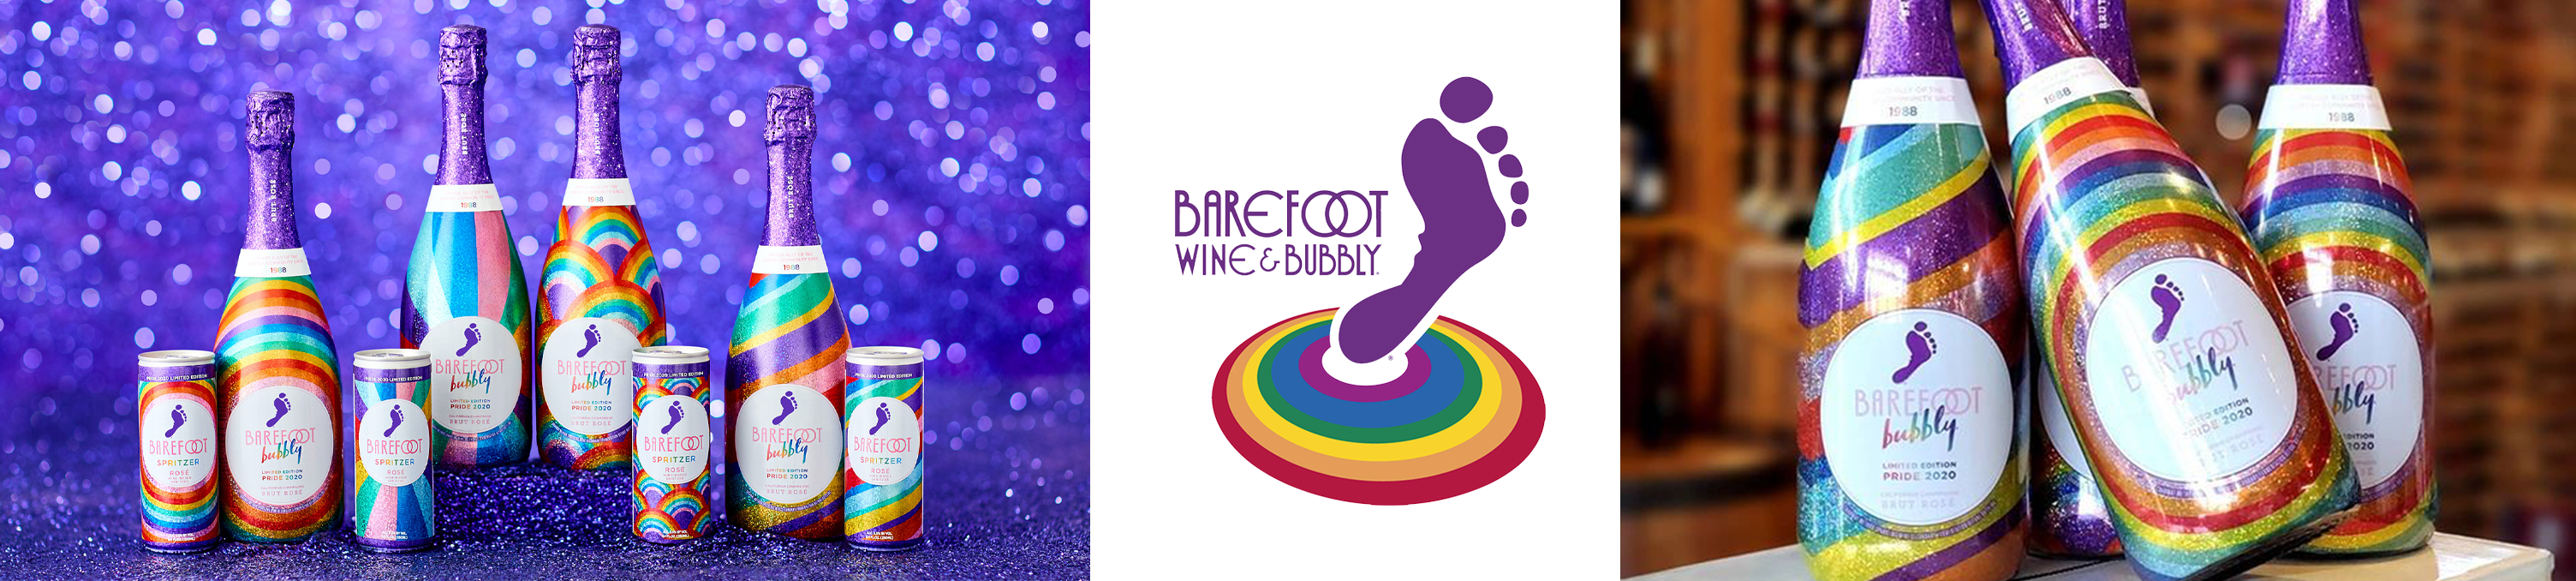 barefoot wine bubbly 2020 pride collection packaging design 